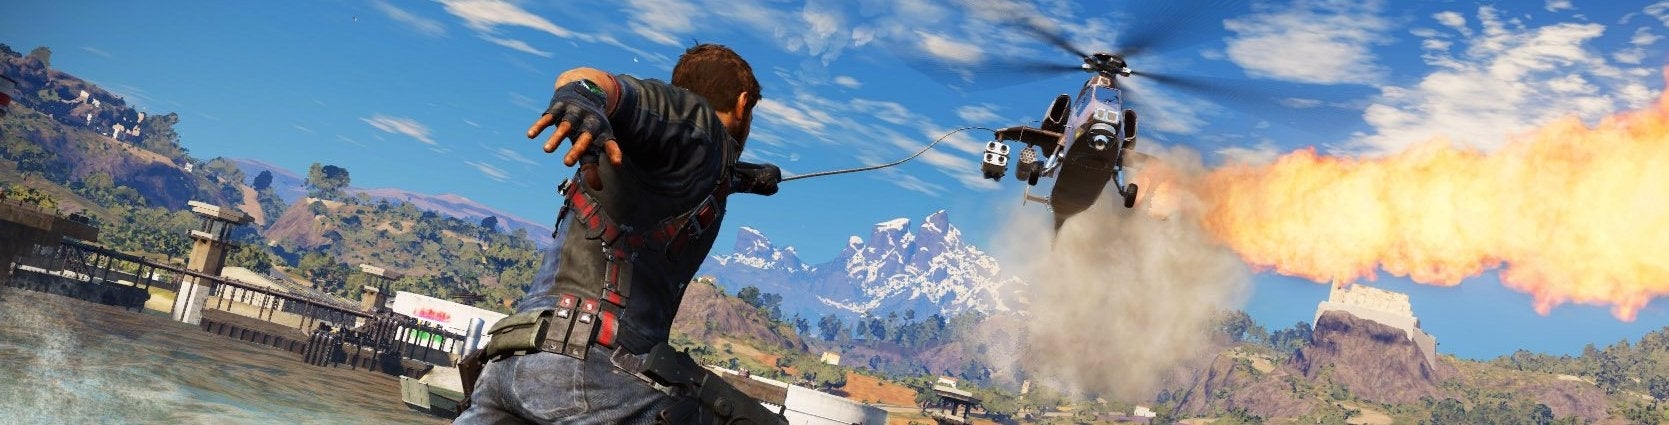 Image for Face-Off: Just Cause 3